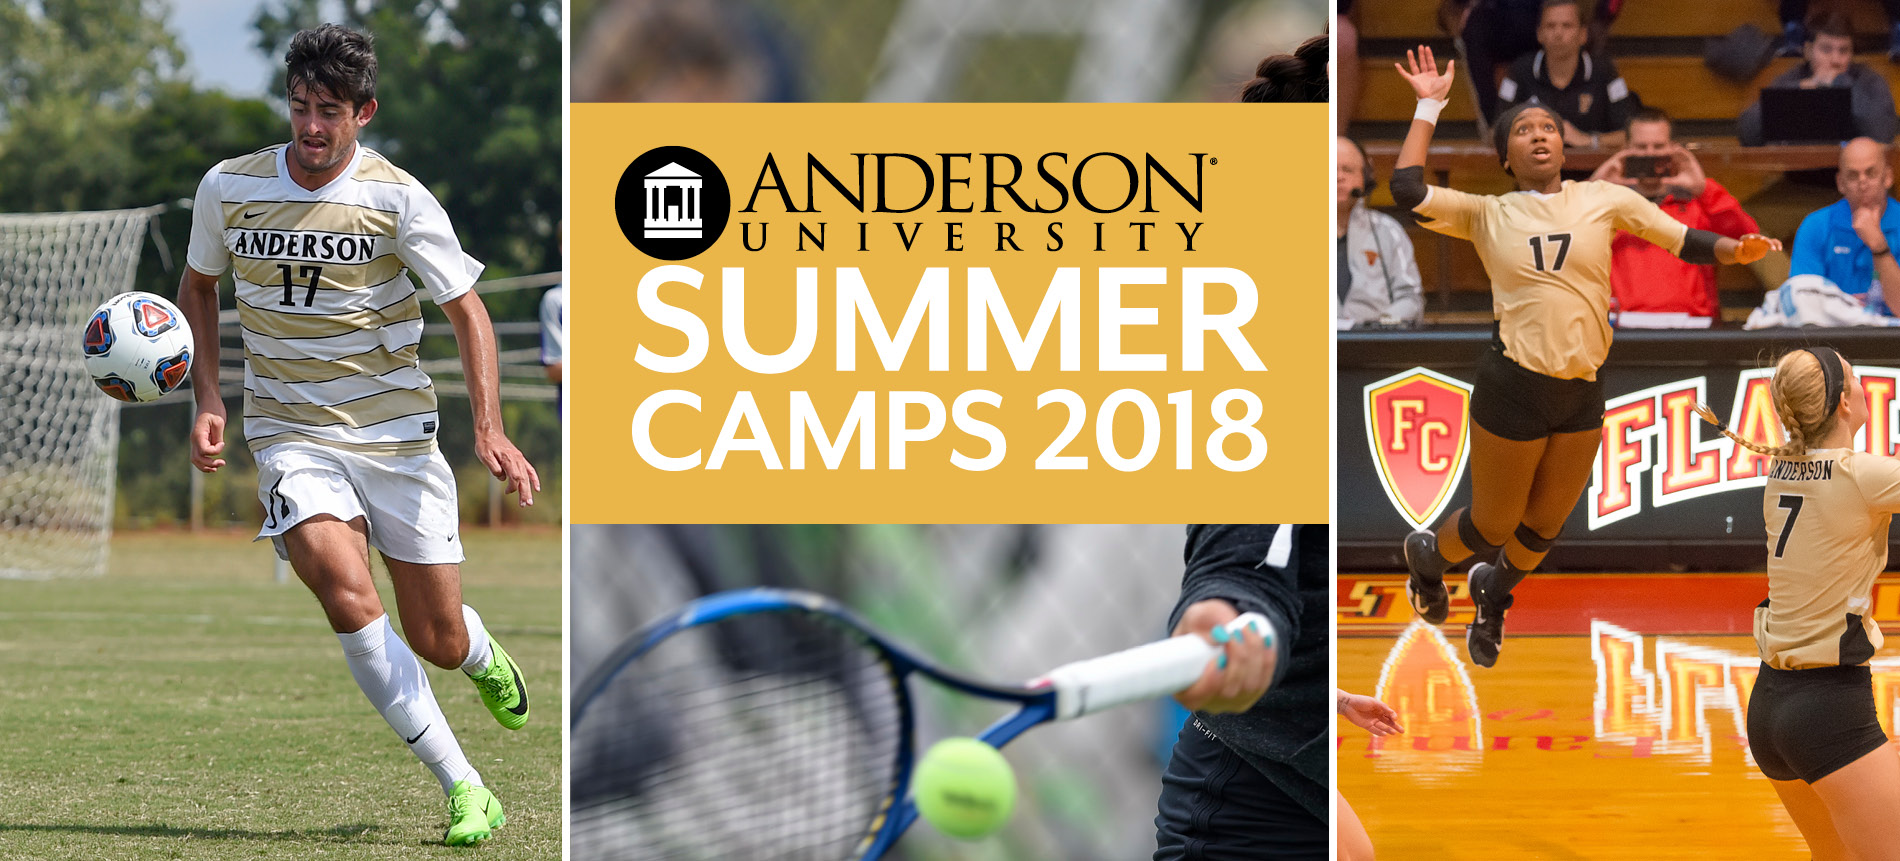 Registration Open for All Summer Camps